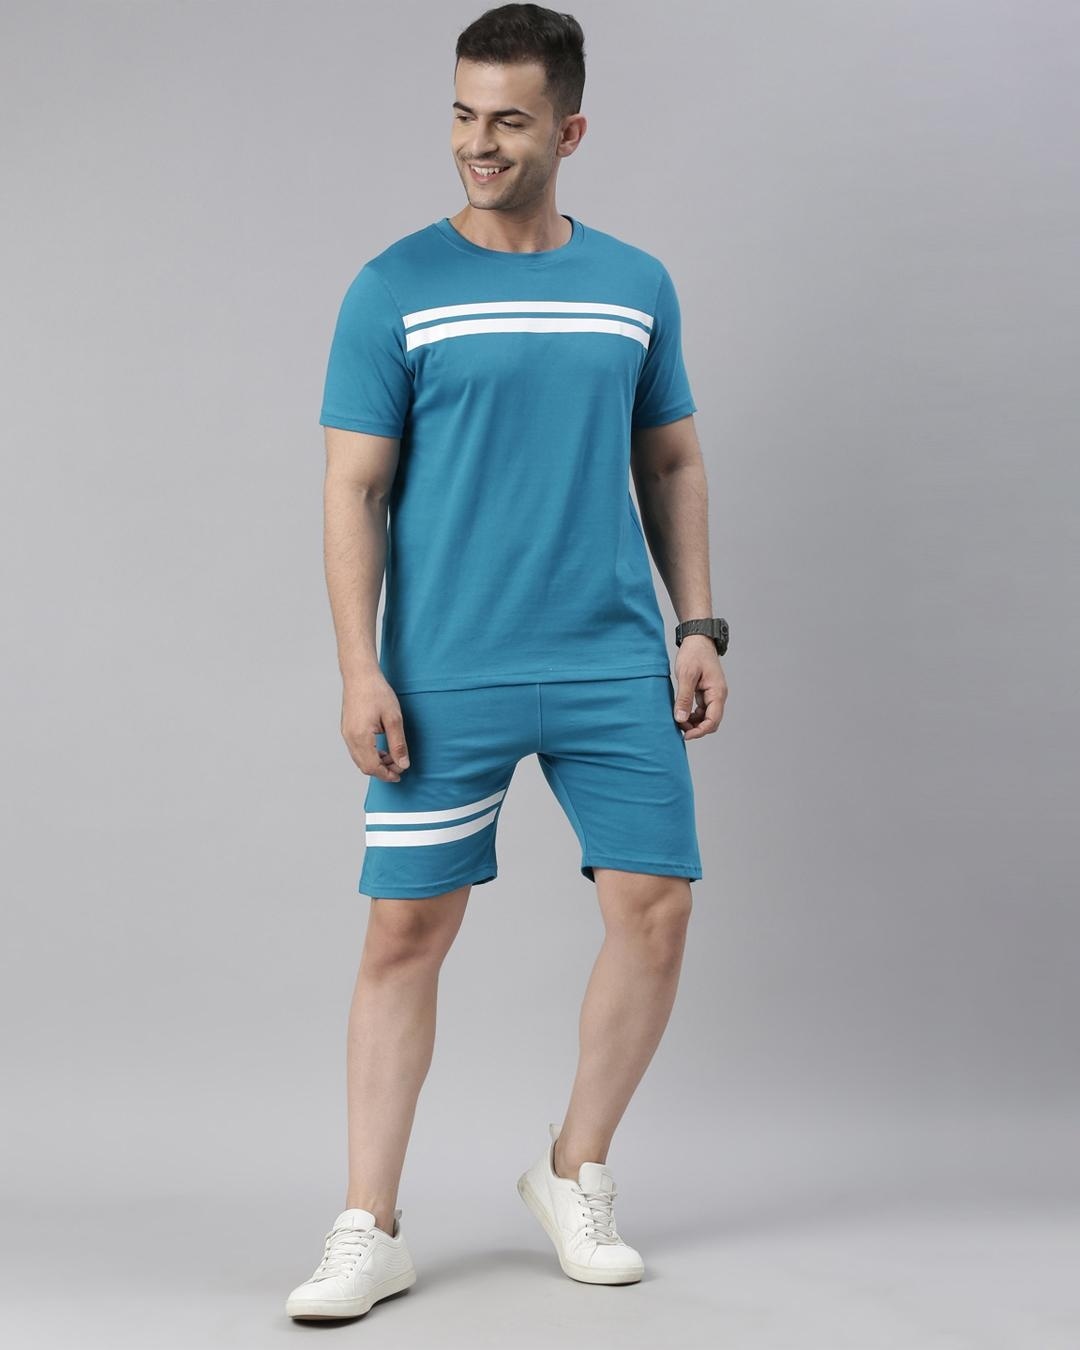 Buy Men's Blue Striped Co-ord Set Online in India at Bewakoof